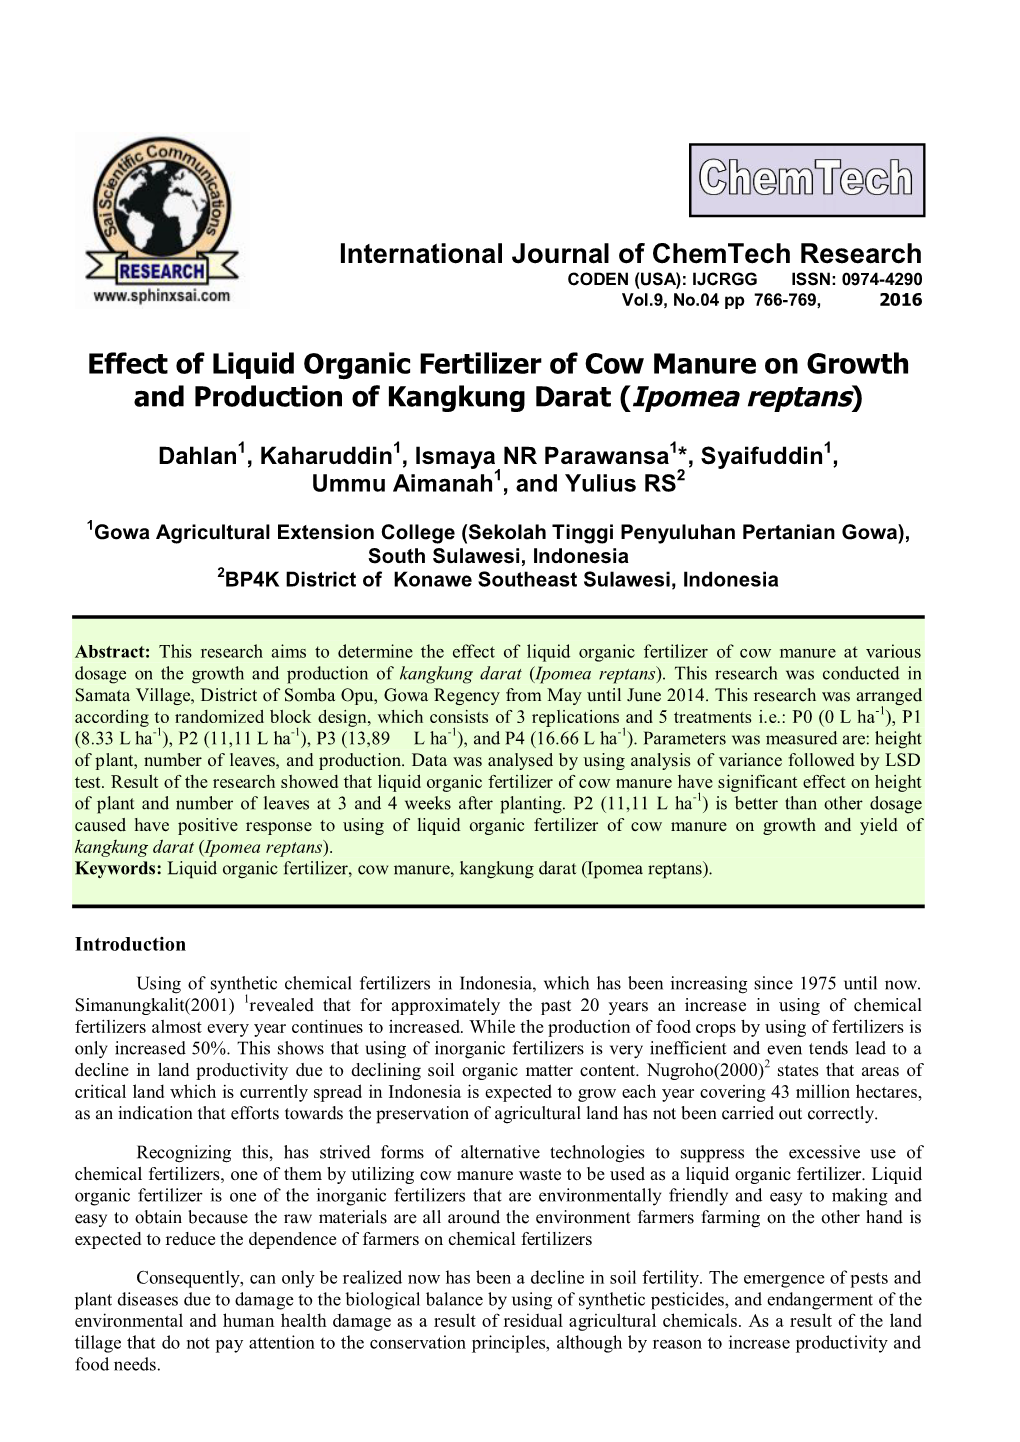 Effect of Liquid Organic Fertilizer of Cow Manure on Growth and Production of Kangkung Darat (Ipomea Reptans)